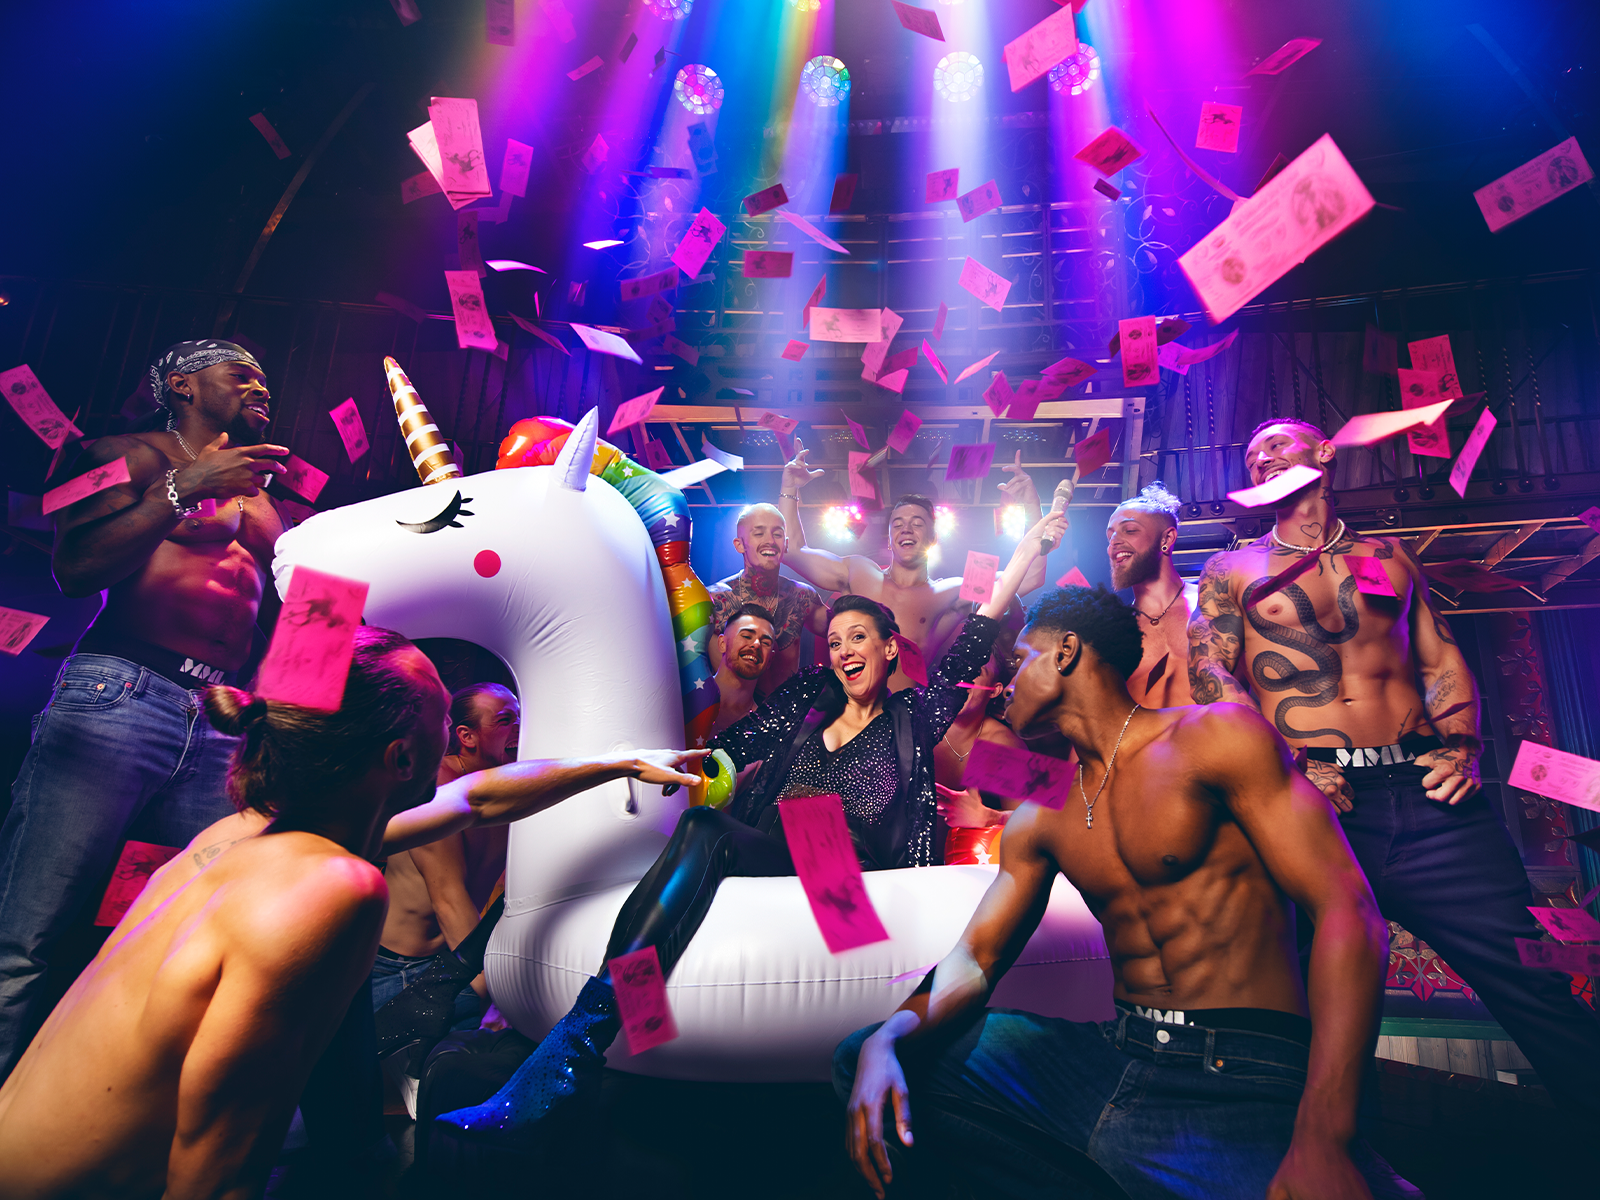 Magic Mike Live photo from the show